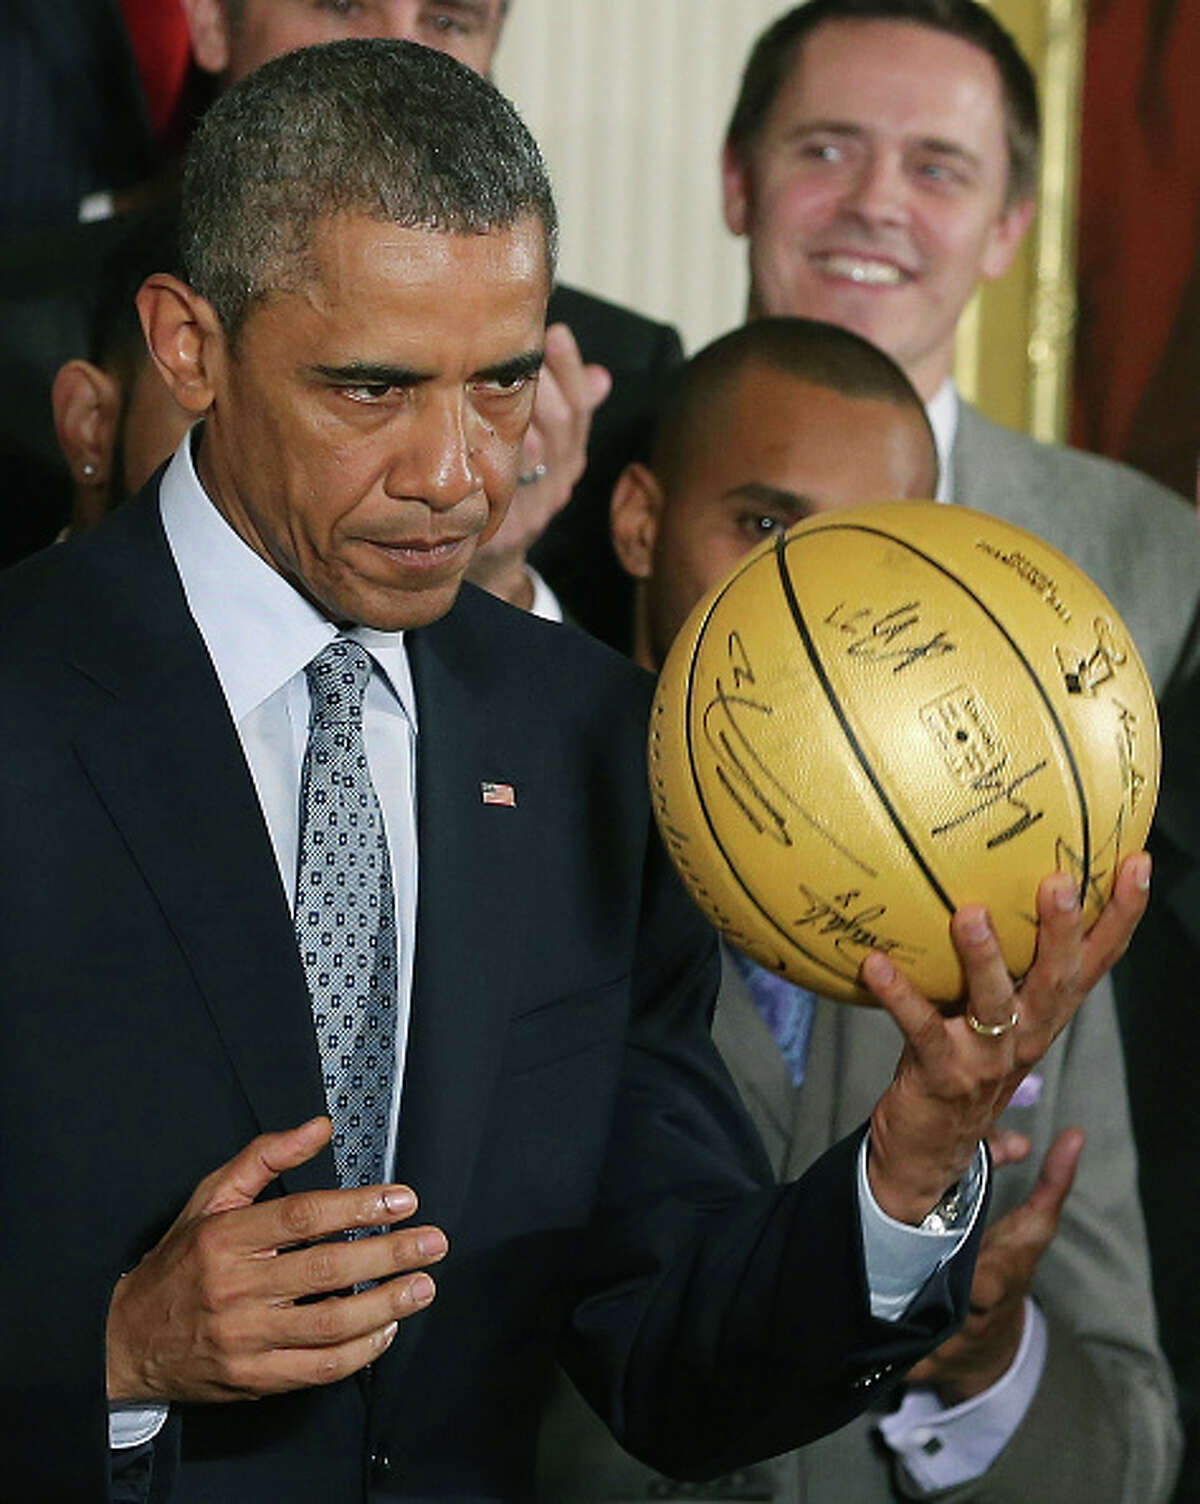 WASHINGTON, DC - JANUARY 12: U.S. President Barack Obama holds a basketball given to him by the 2014 NBA Champion San Antonio Spurs during an event in the East Room at the White House, January 12, 2015 in Washington, DC. President Obama honored the Spurs for winning their fifth NBA championship by beating the Miami Heat in game five with a 104-87 victory. (Photo by Mark Wilson/Getty Images)